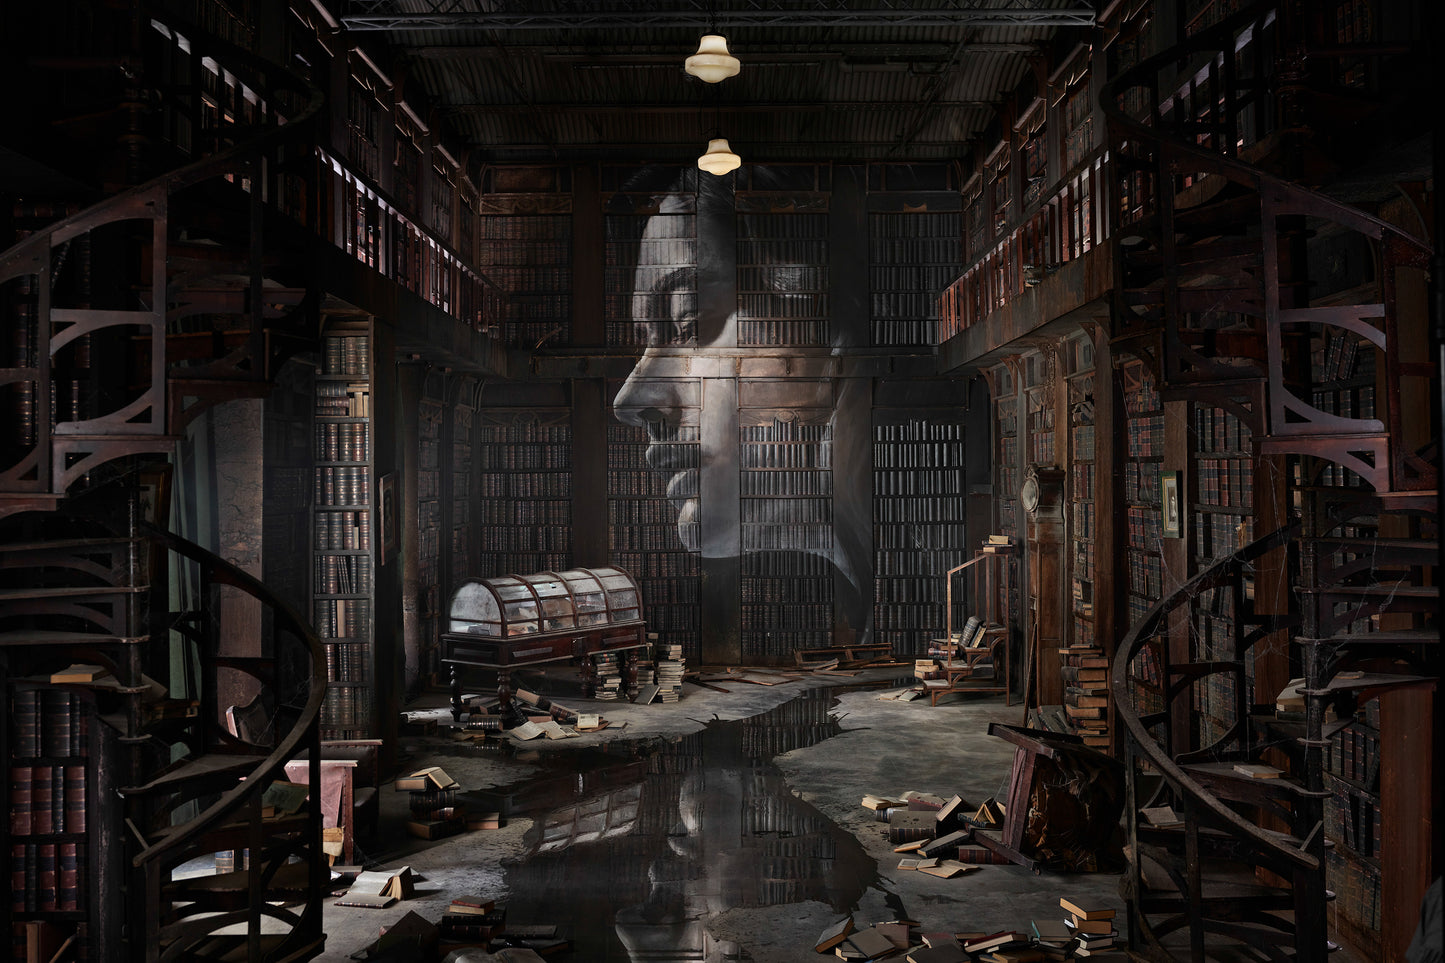 The Library - OPEN EDITION PRINT